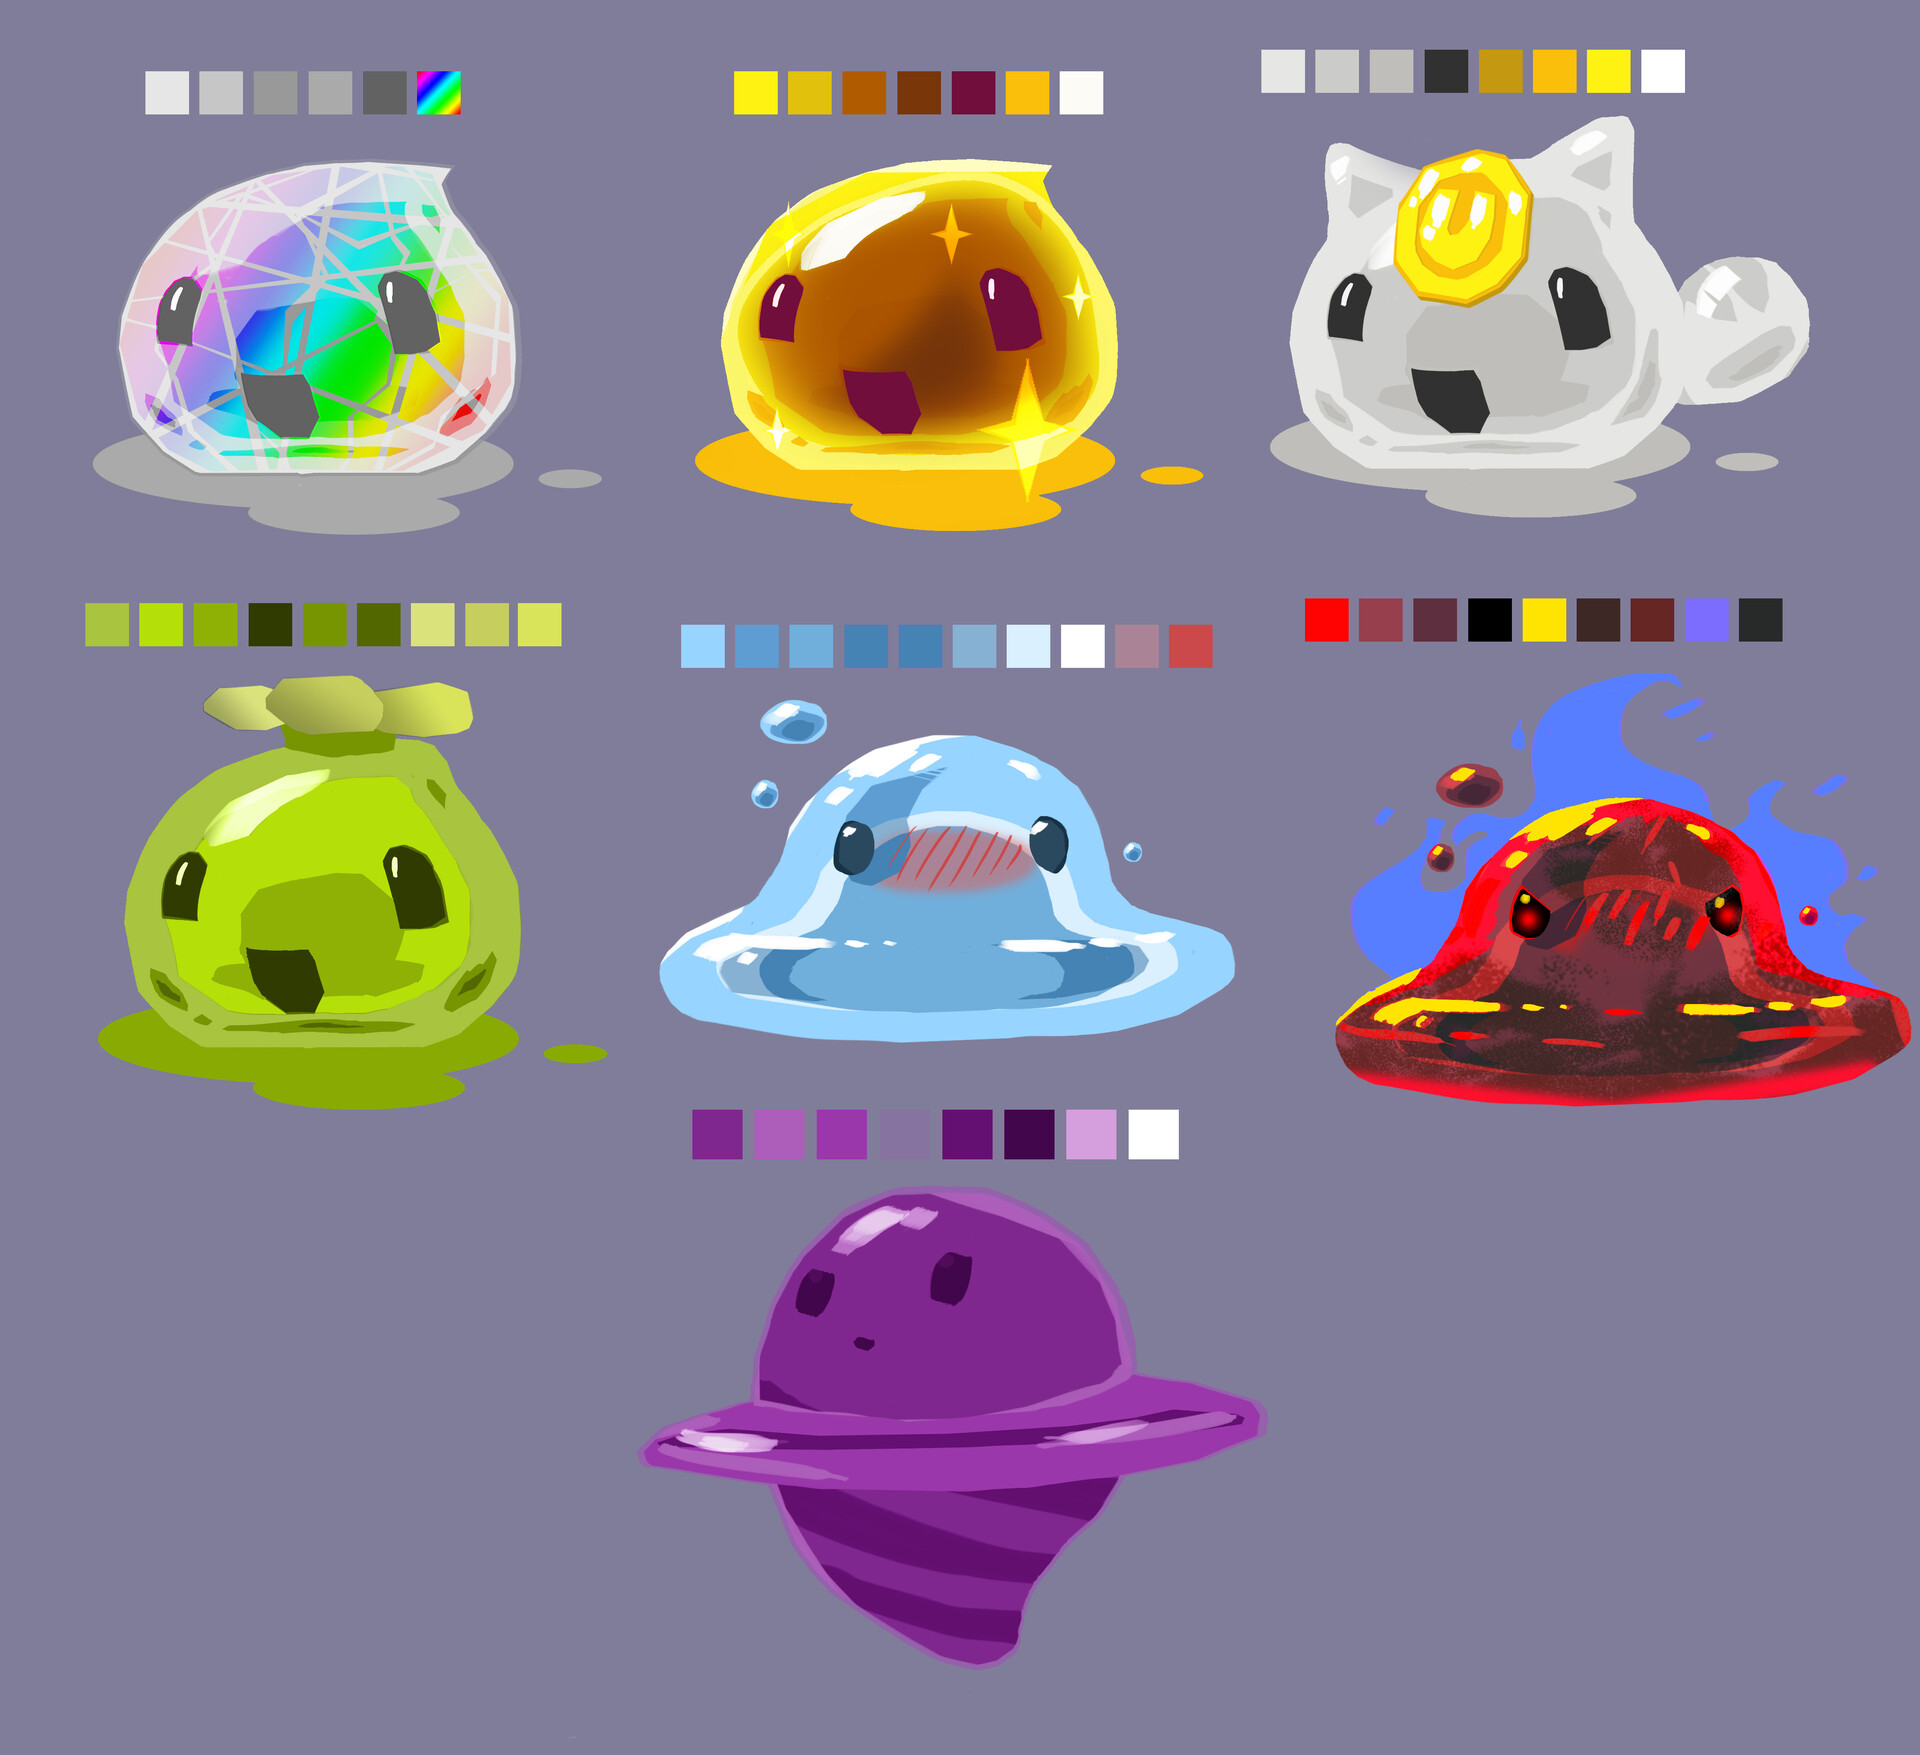 Alexei Shmakov - some another slimes from Slime Rancher (fan palitres)